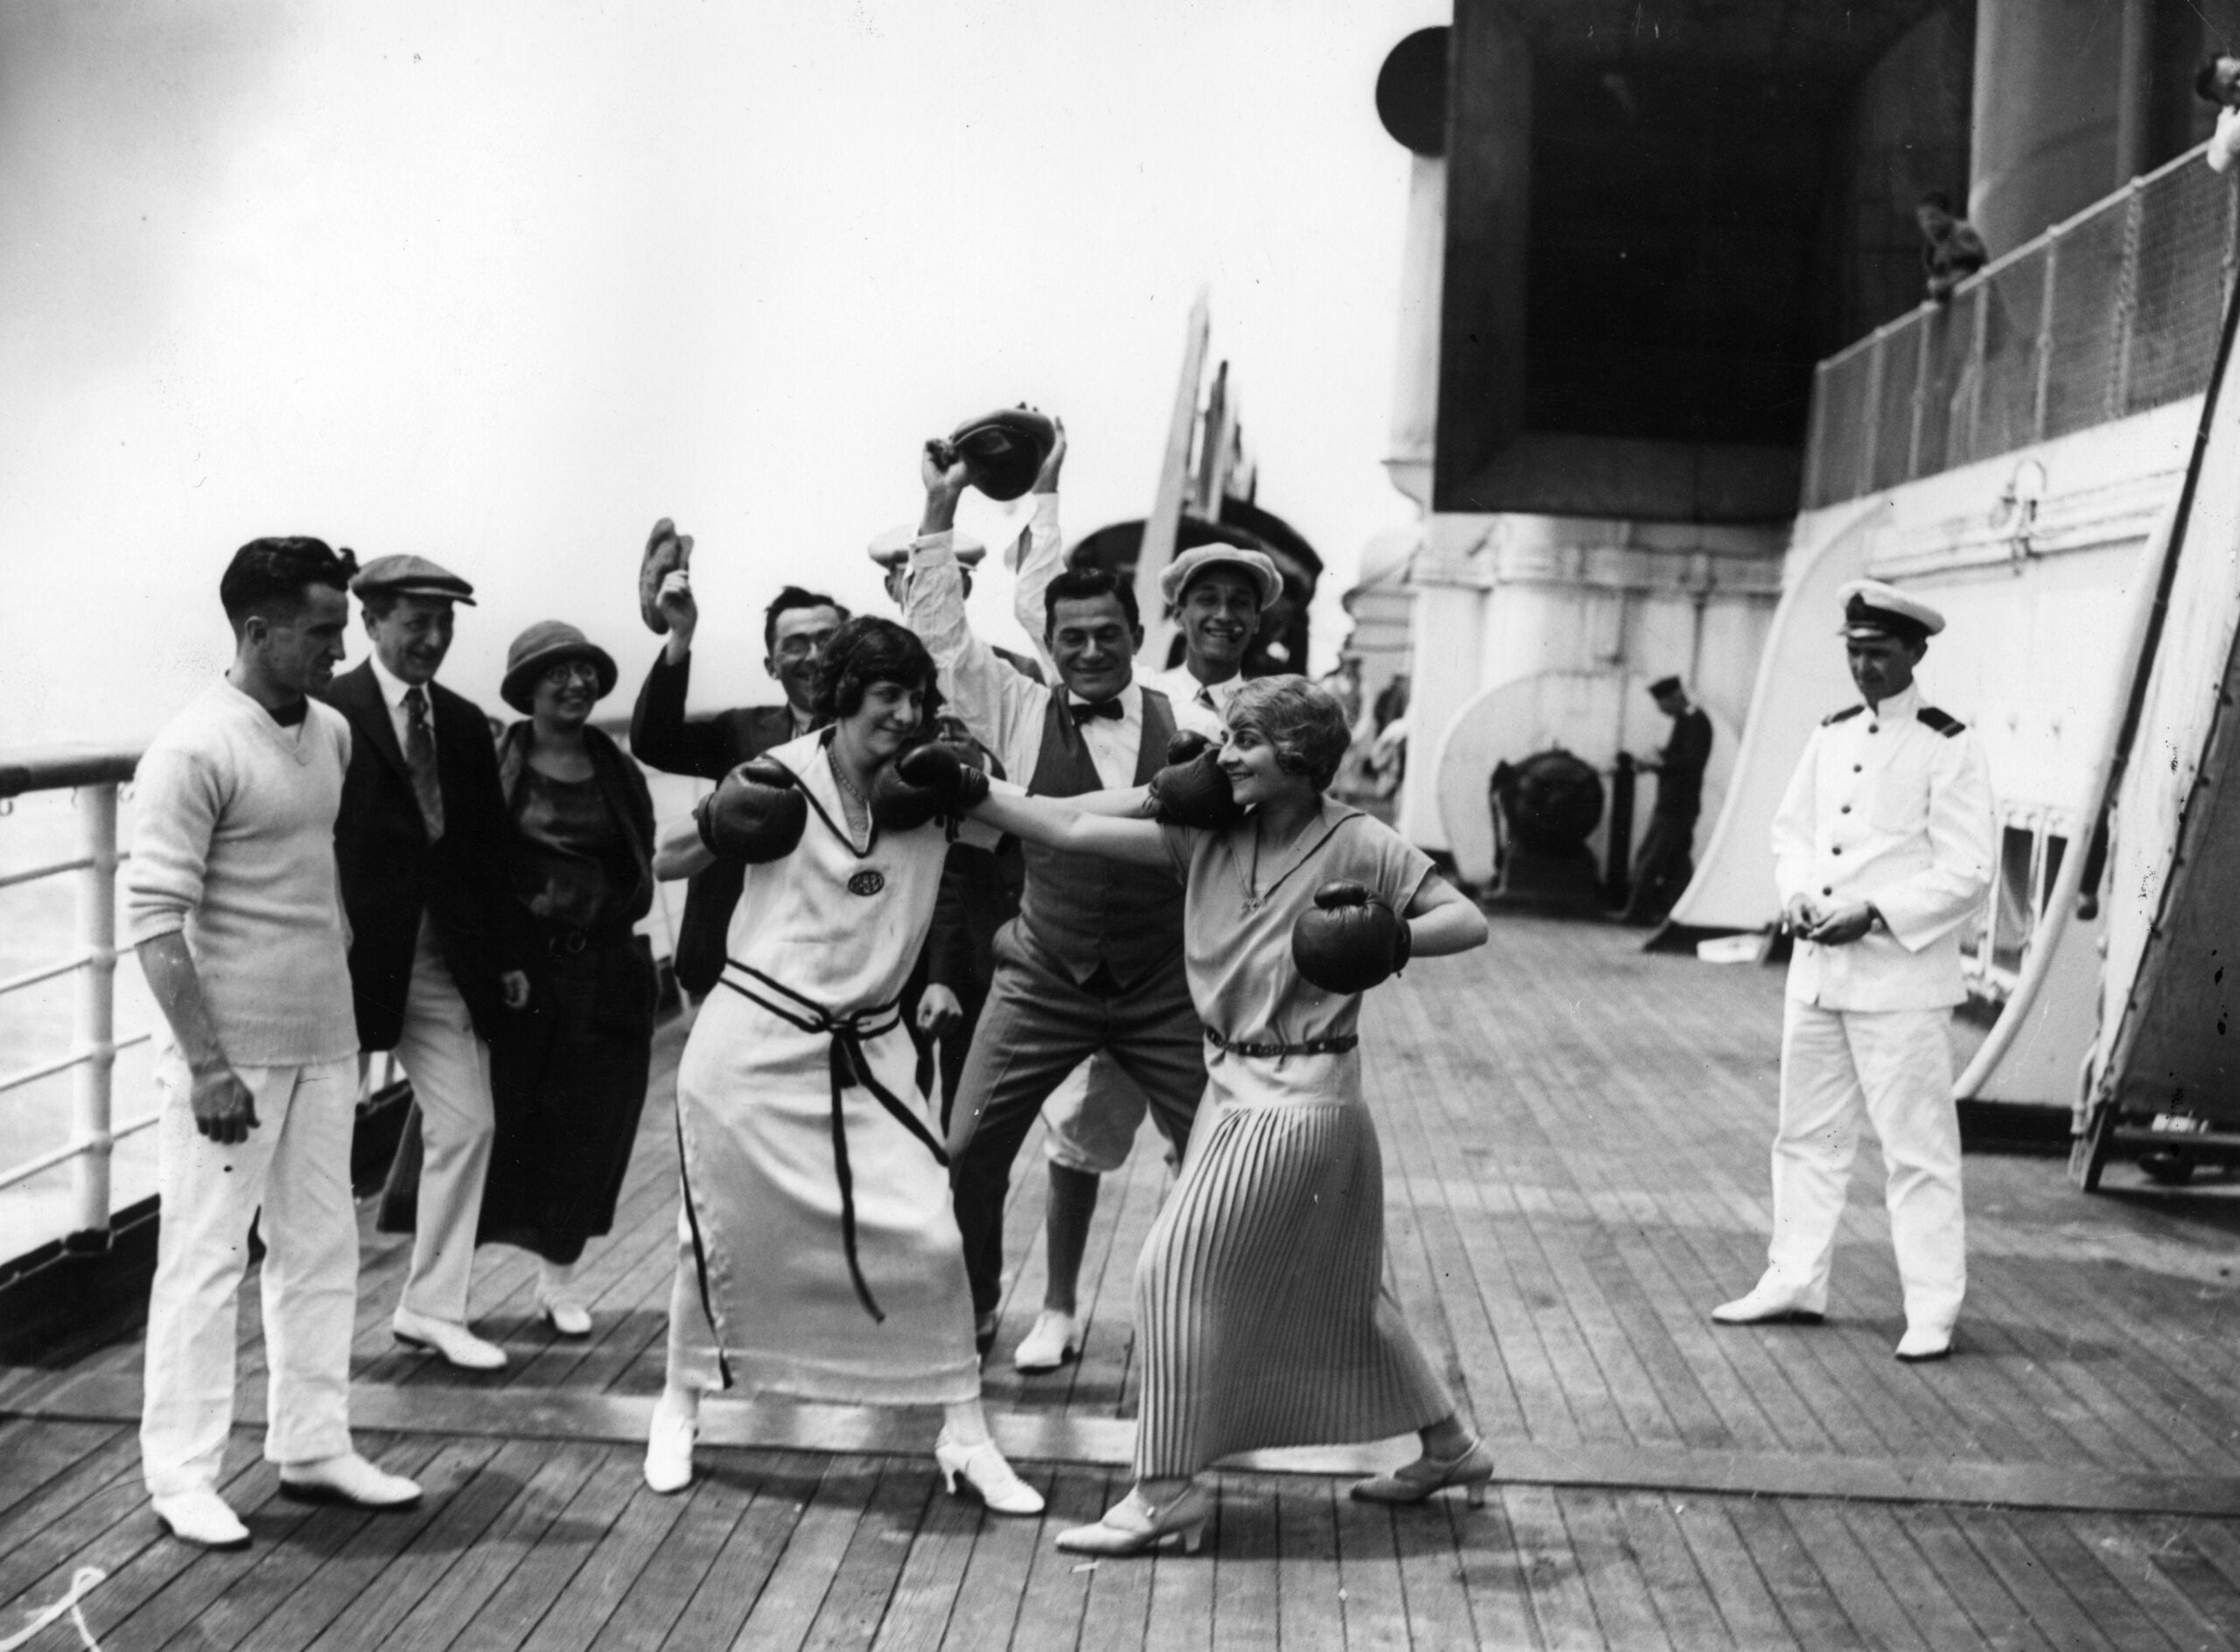 uly 1923: Two women passengers boxing aboard Cunard liner &#39;Berengaria&#39; watched by fellow passengers and an officer.